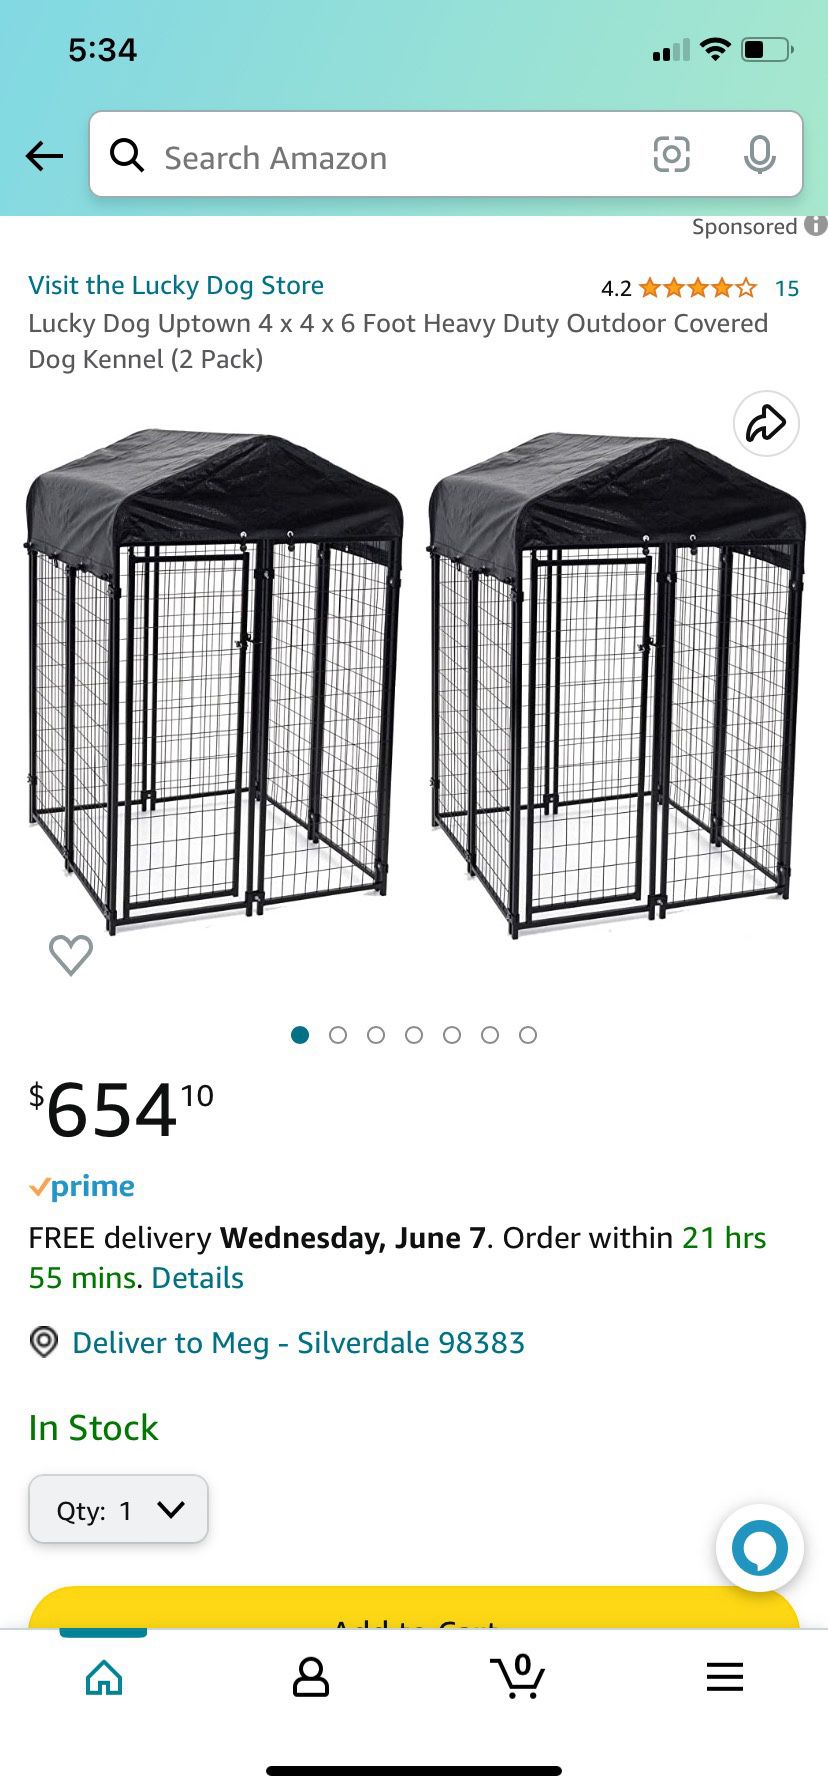 Two Dog/pet Kennels